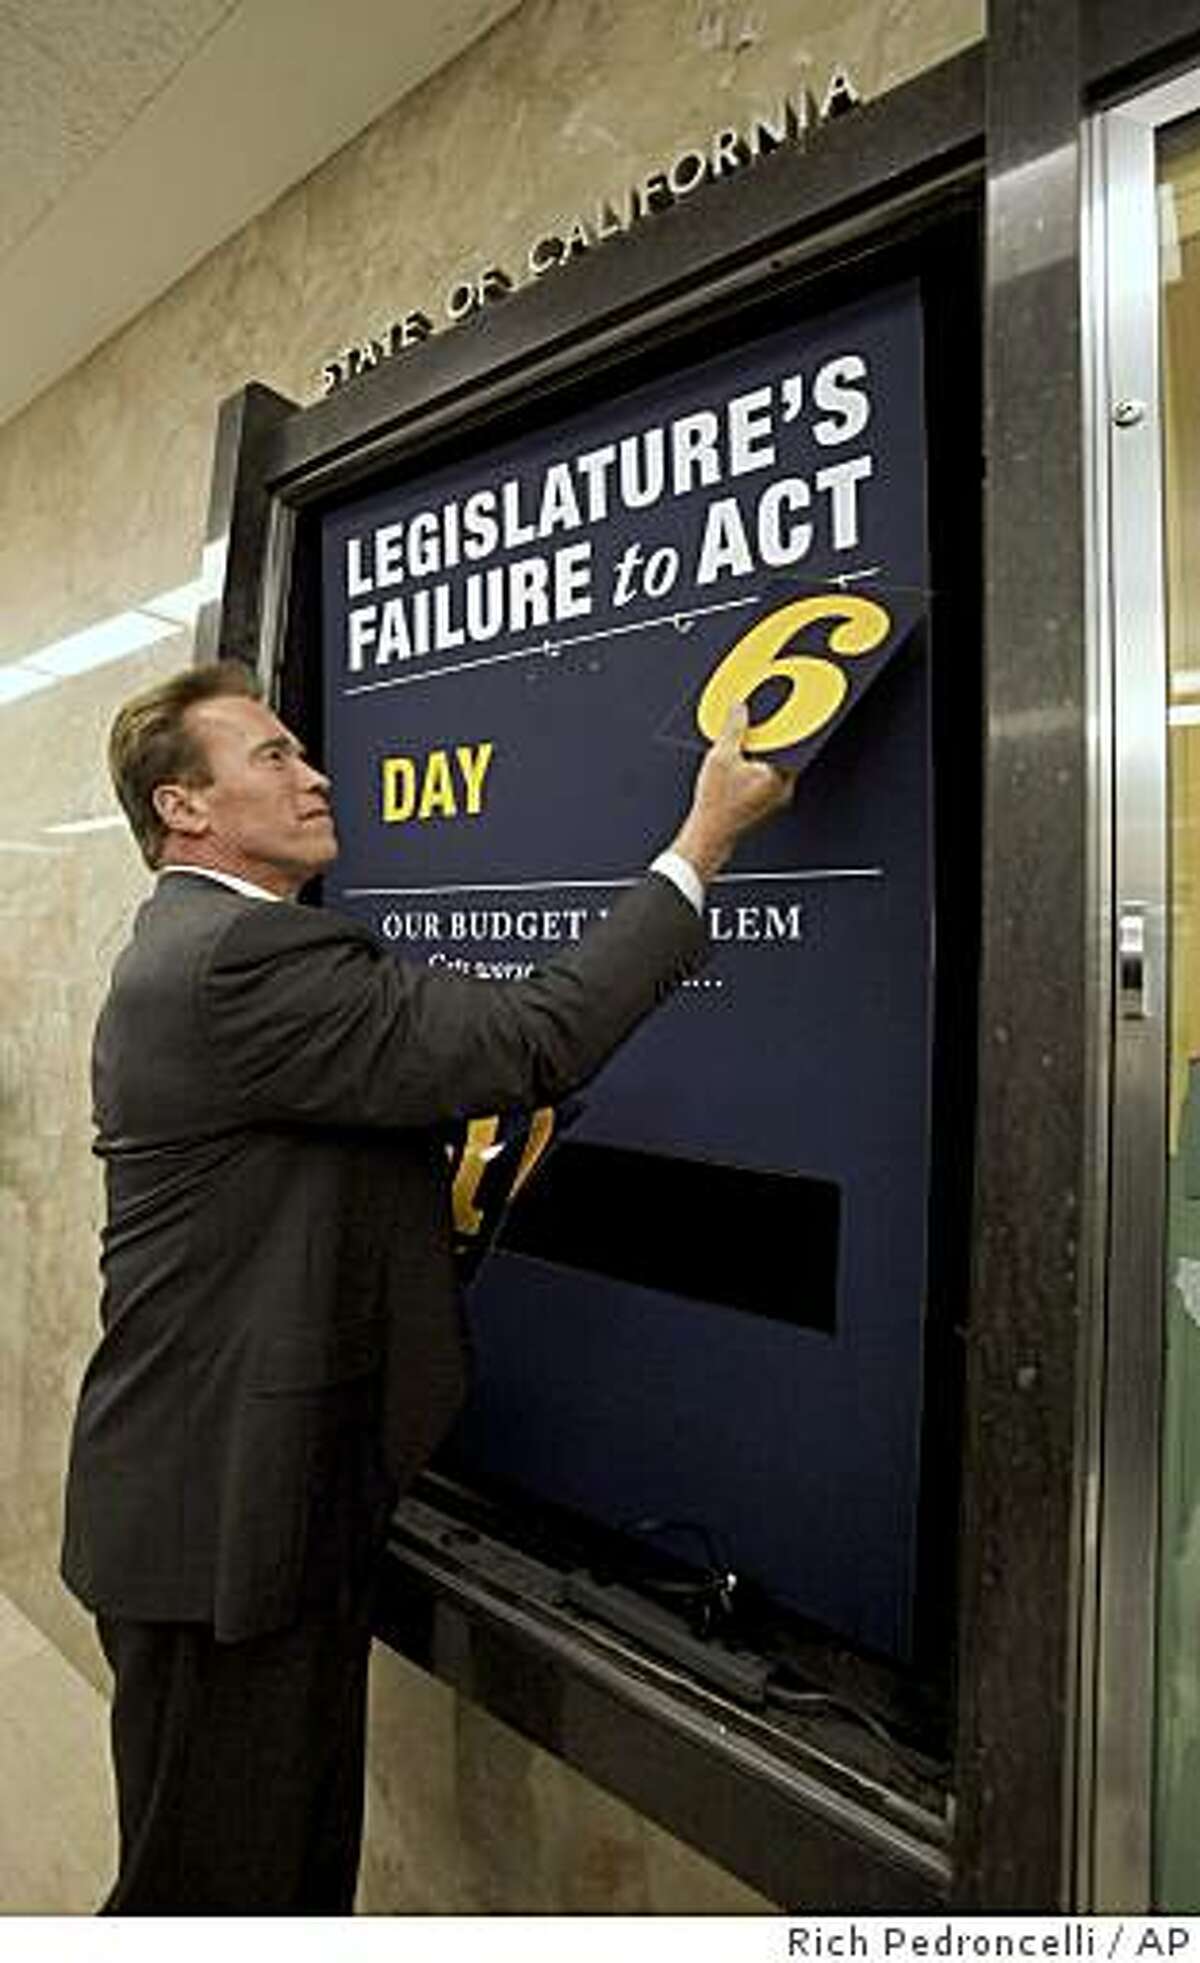 After the Legislatures approval of the state budget, Gov. Arnold Schwarzenegger removes the numbers from the "deficit clock," outside his Capitol office in Sacramento, Calif., Thursday, Feb. 19, 2009. Schwarzenegger had the clock installed 106 days ago to count the number of days that the Legislature failed to act since he declared a special session to deal with the states fiscal problems. (AP Photo/Rich Pedroncelli)